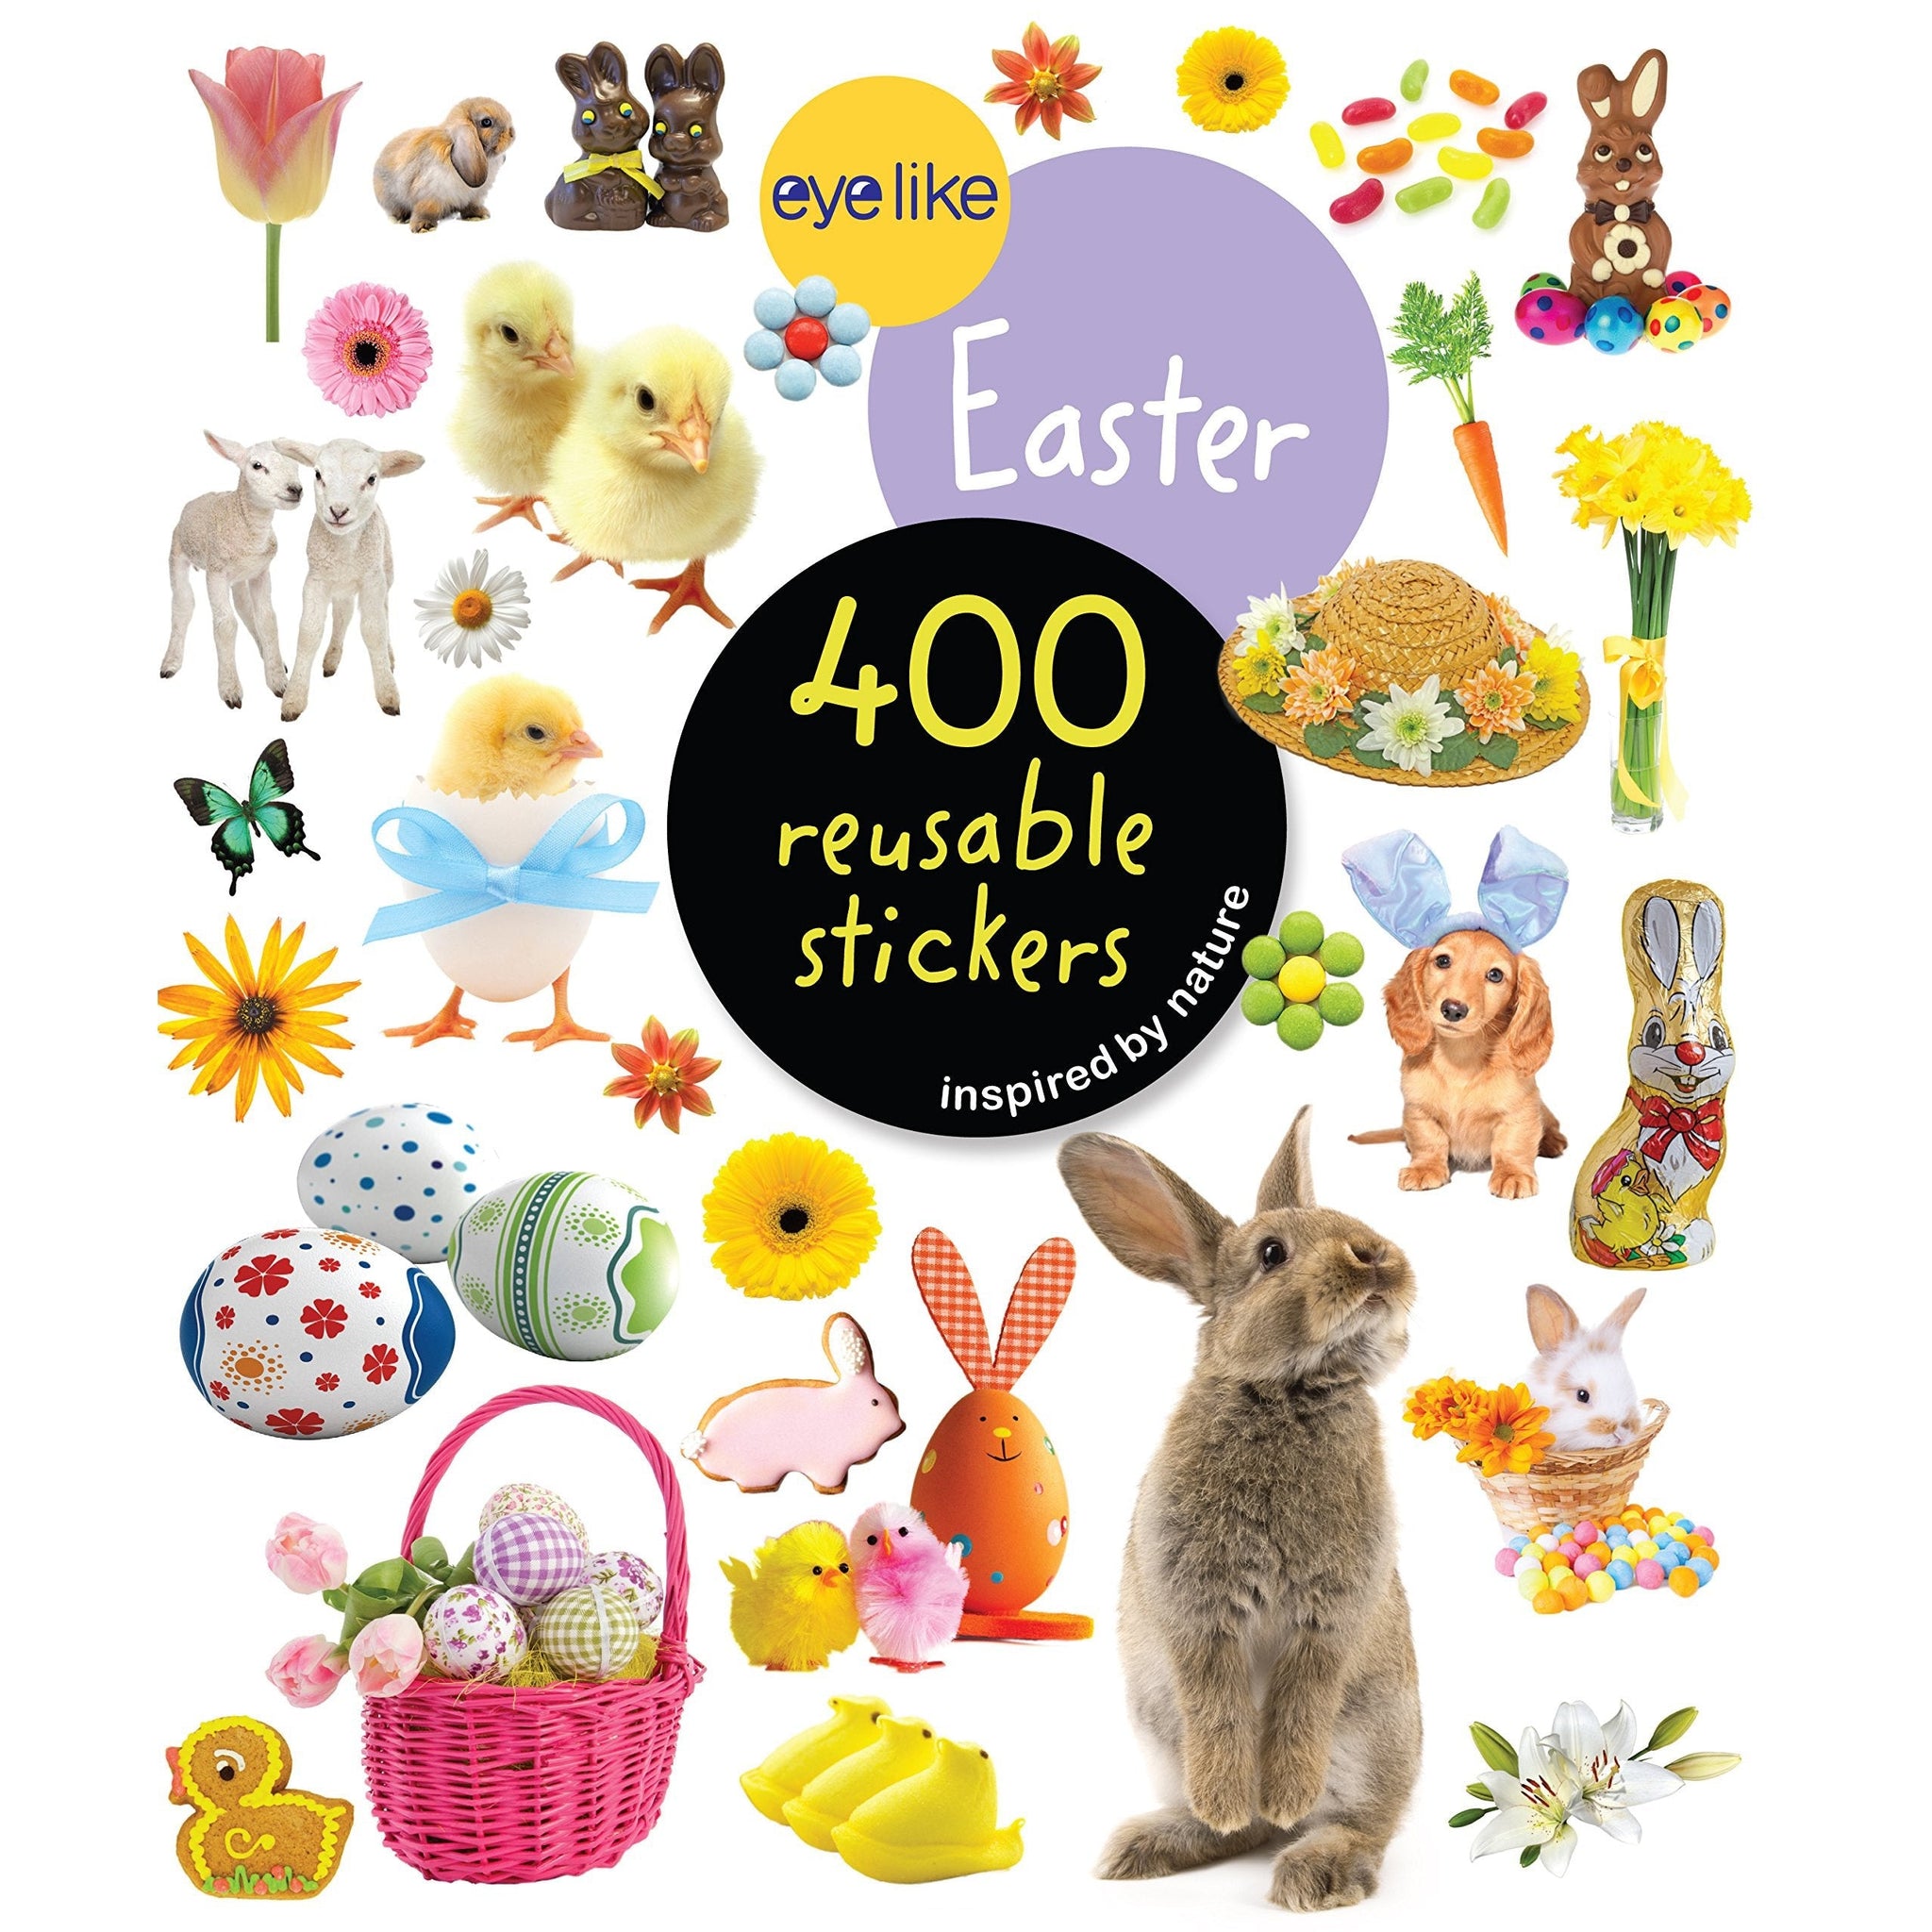 The Ultimate Sticker Book Animals: More Than 250 Reusable Stickers,  Including Giant Stickers! (Paperback)